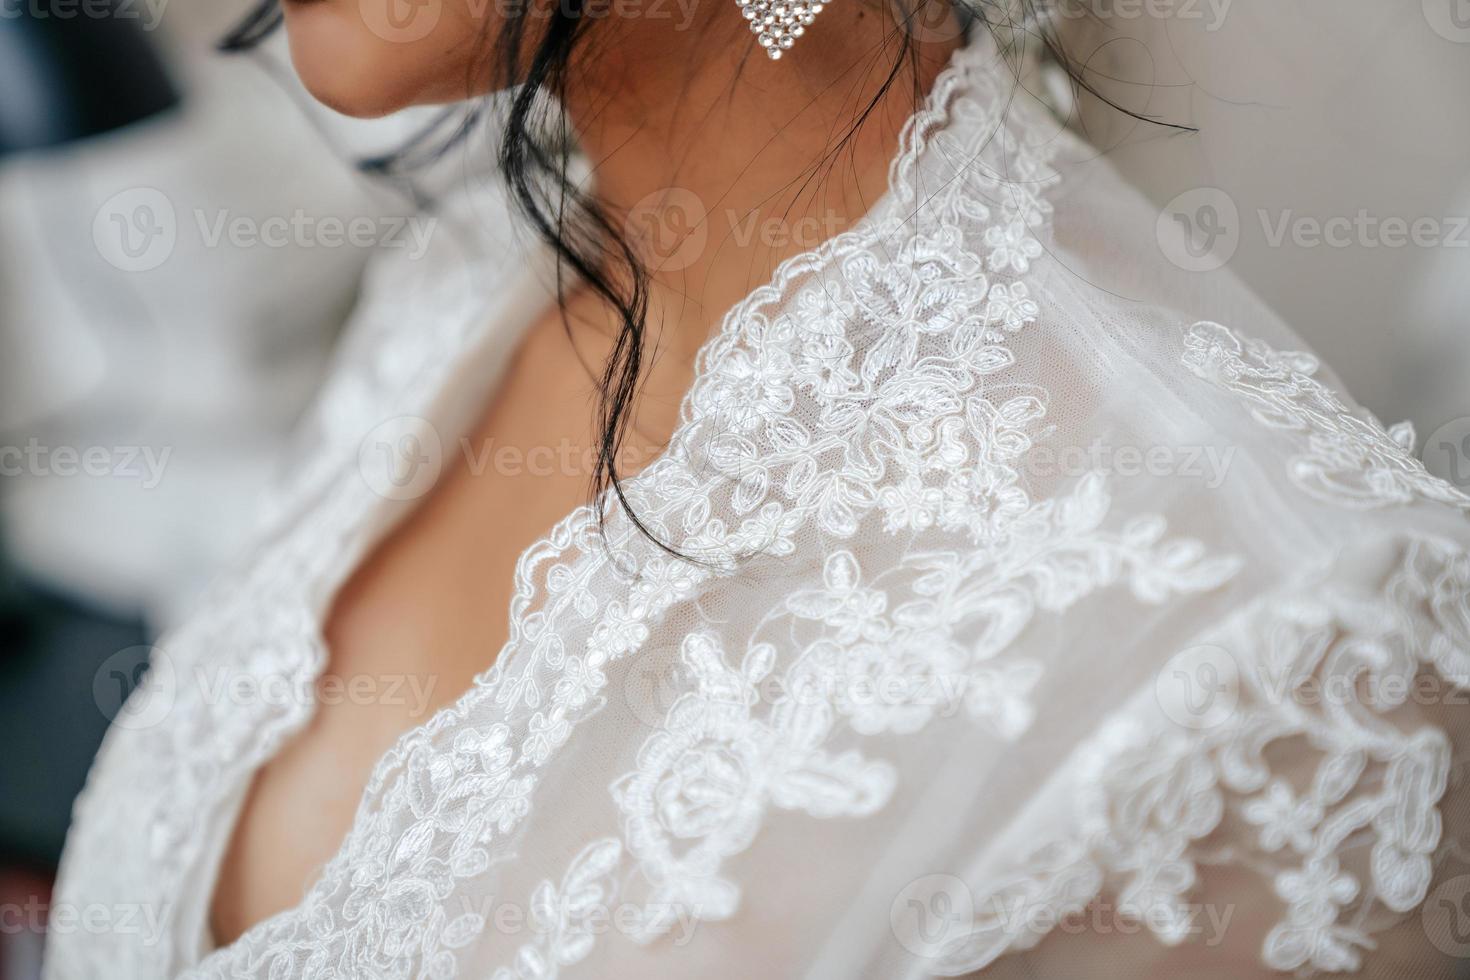 Girl in a wedding dress close-up photo